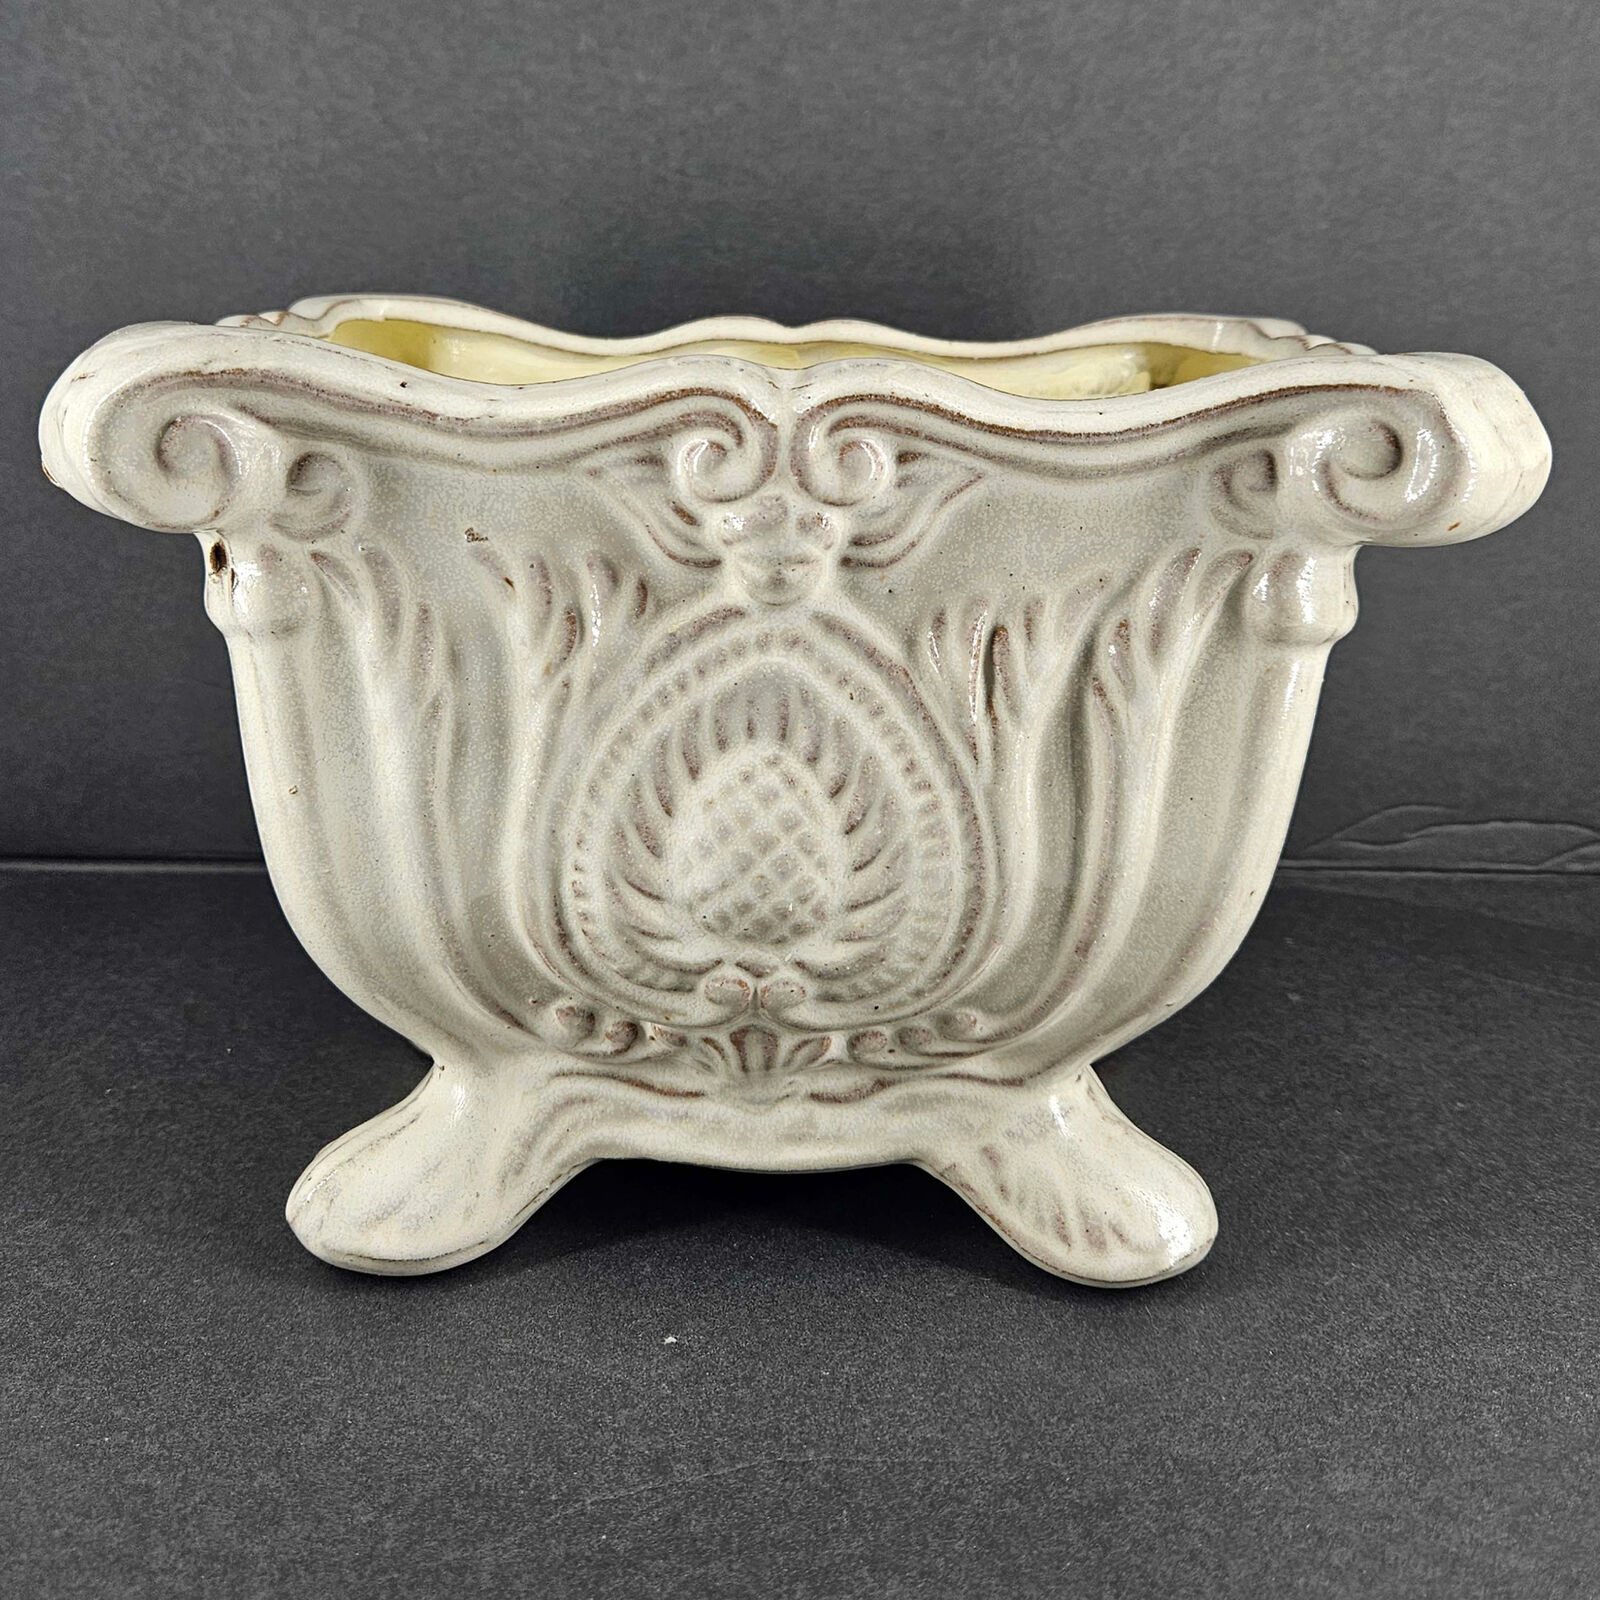 Vintage footed Edwardian Victorian style ornate cachepot planter dish